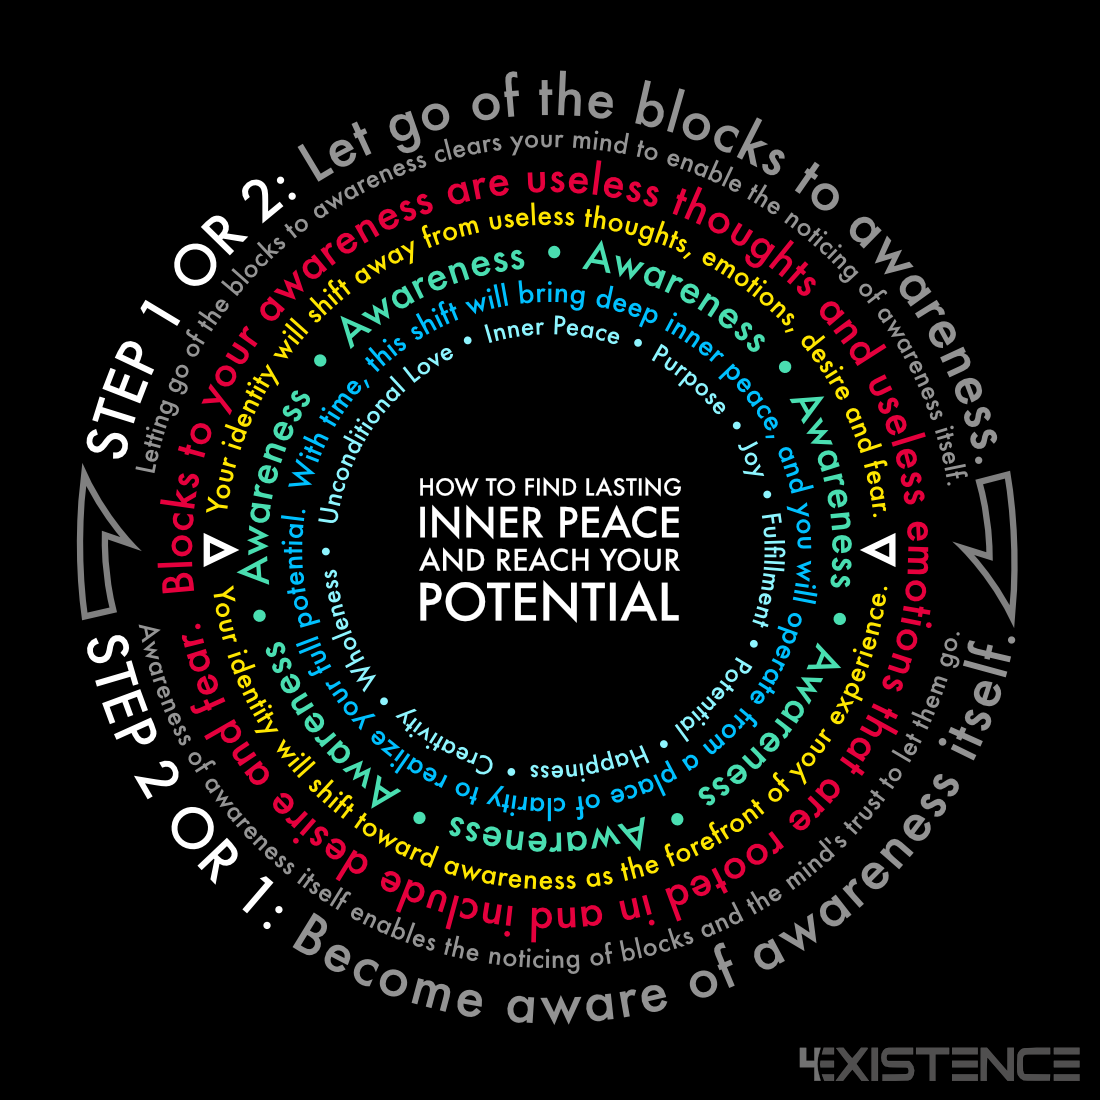 How to Find Inner Peace and Reach Your Full Potential Infographic